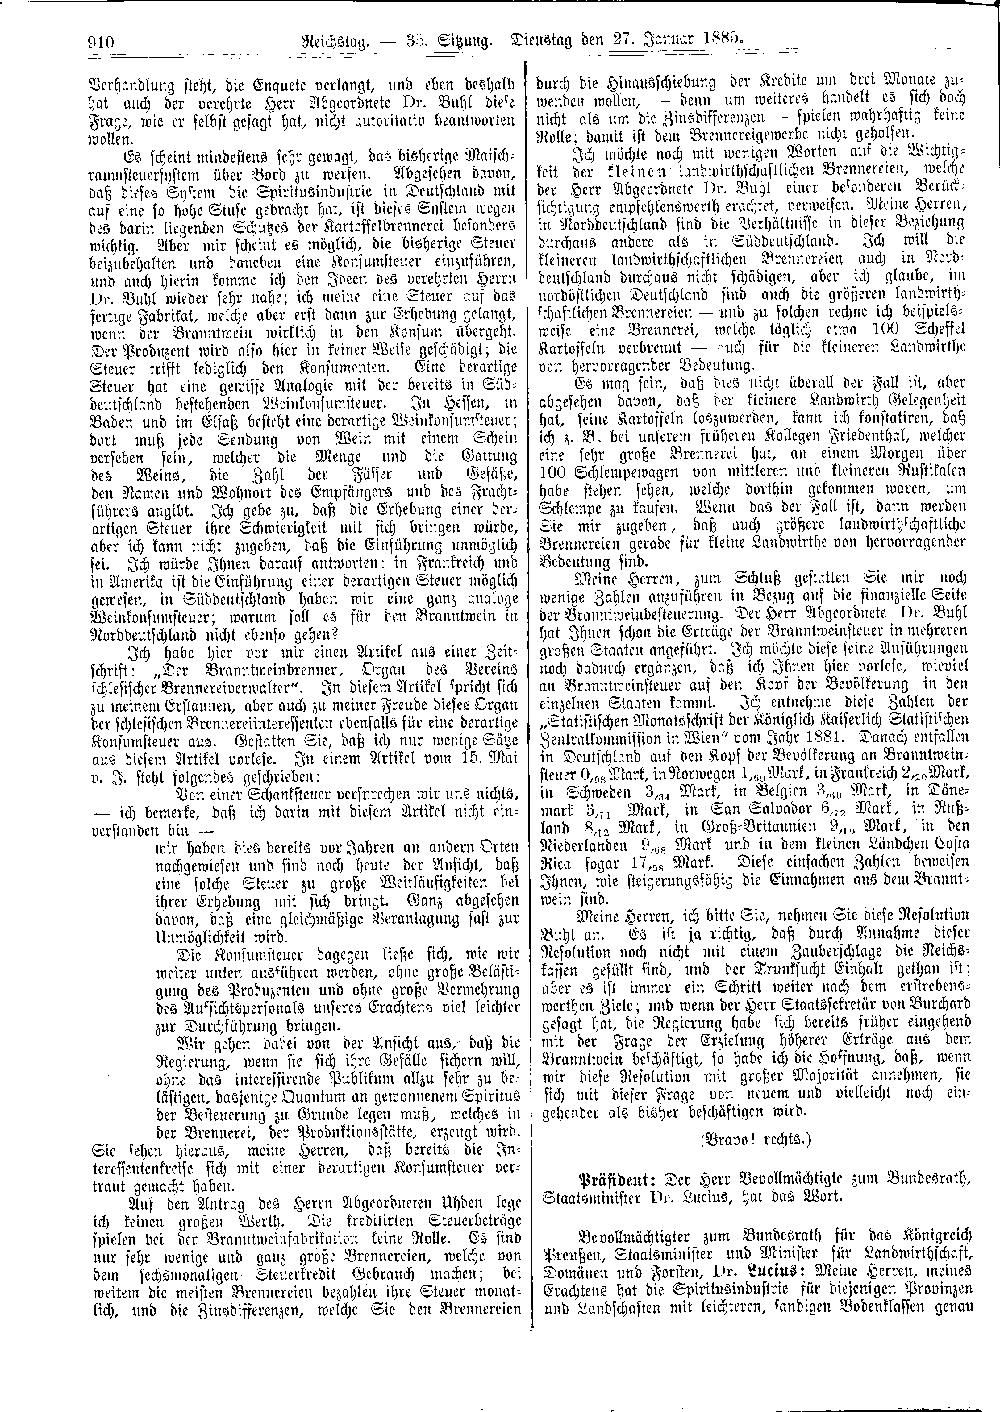 Scan of page 910